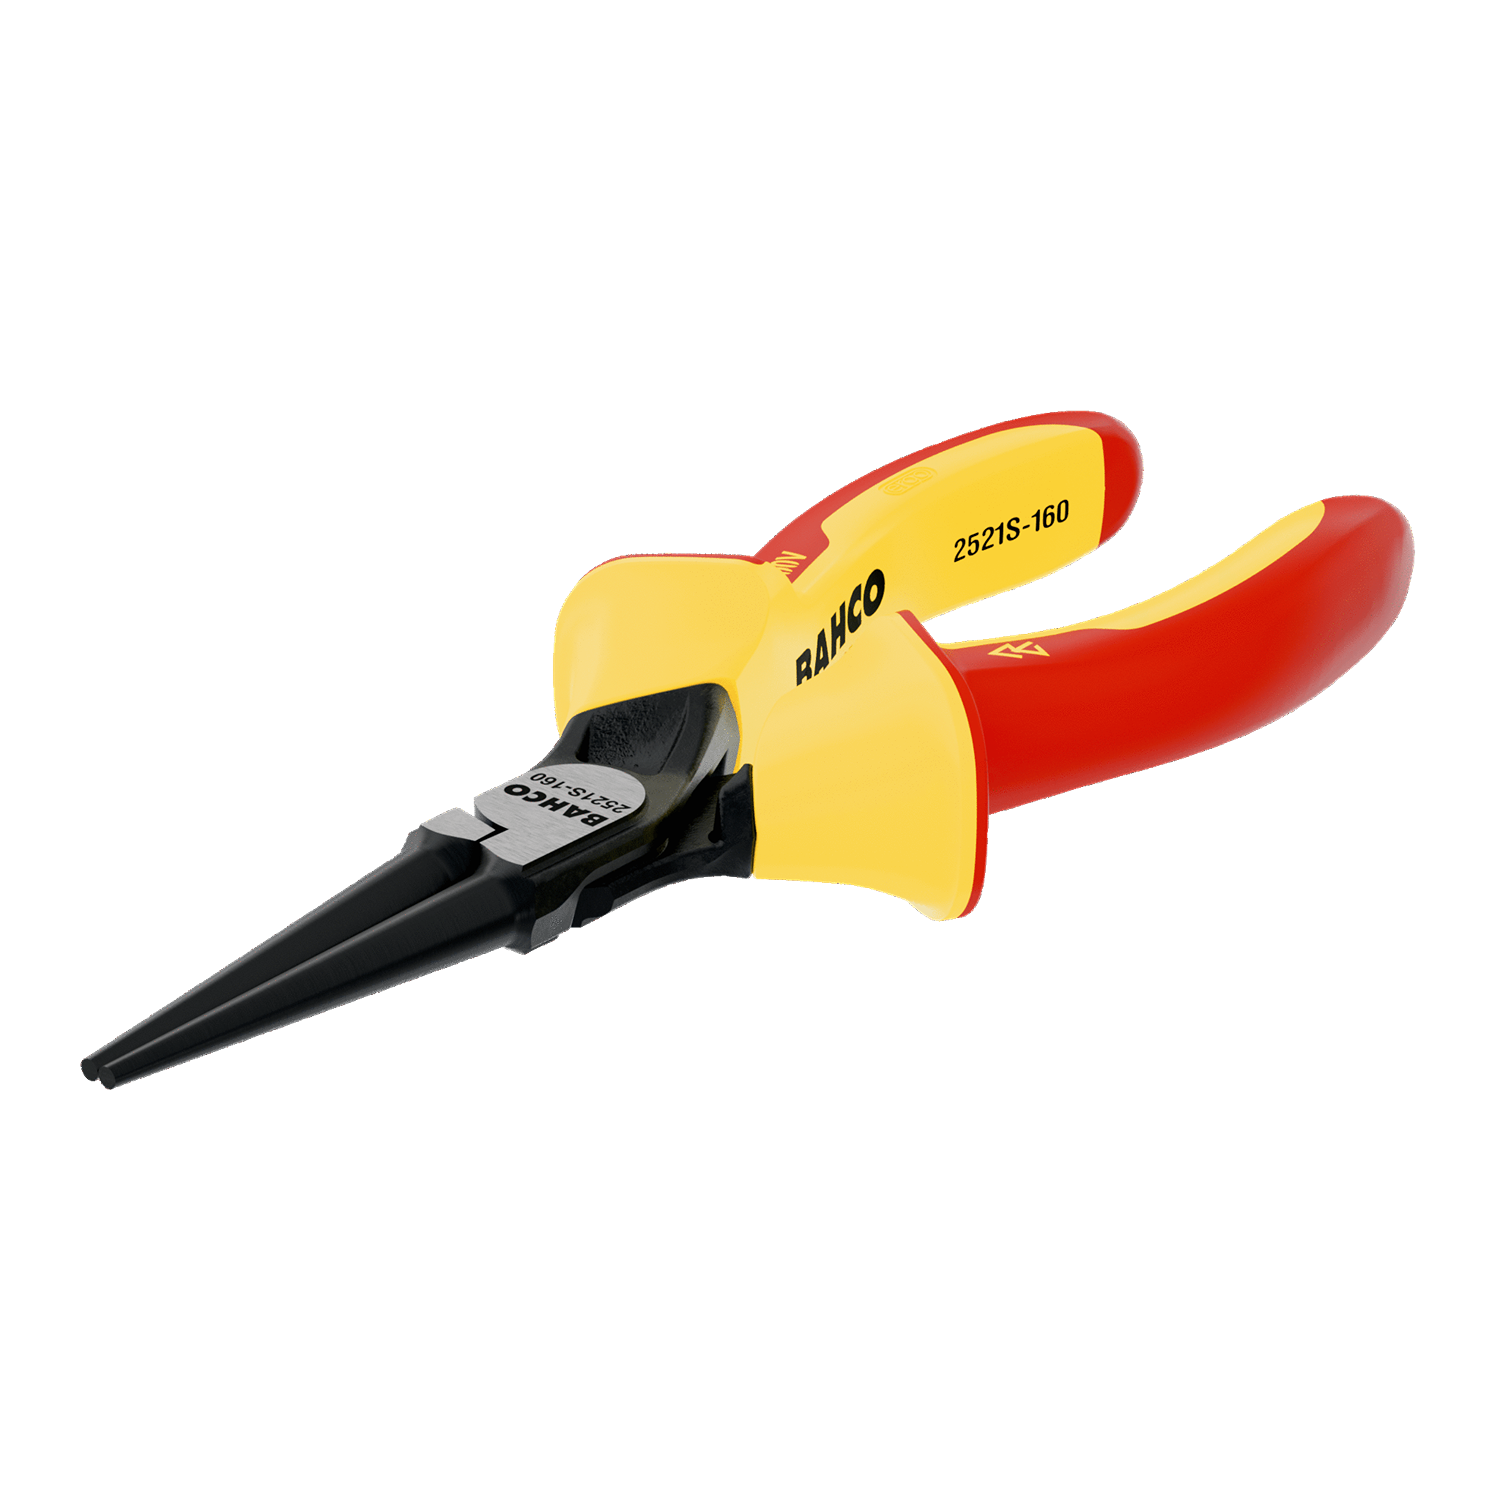 BAHCO 2521S ERGO Round Nose Plier with Insulated Dual Handles - Premium Round Nose Plier from BAHCO - Shop now at Yew Aik.